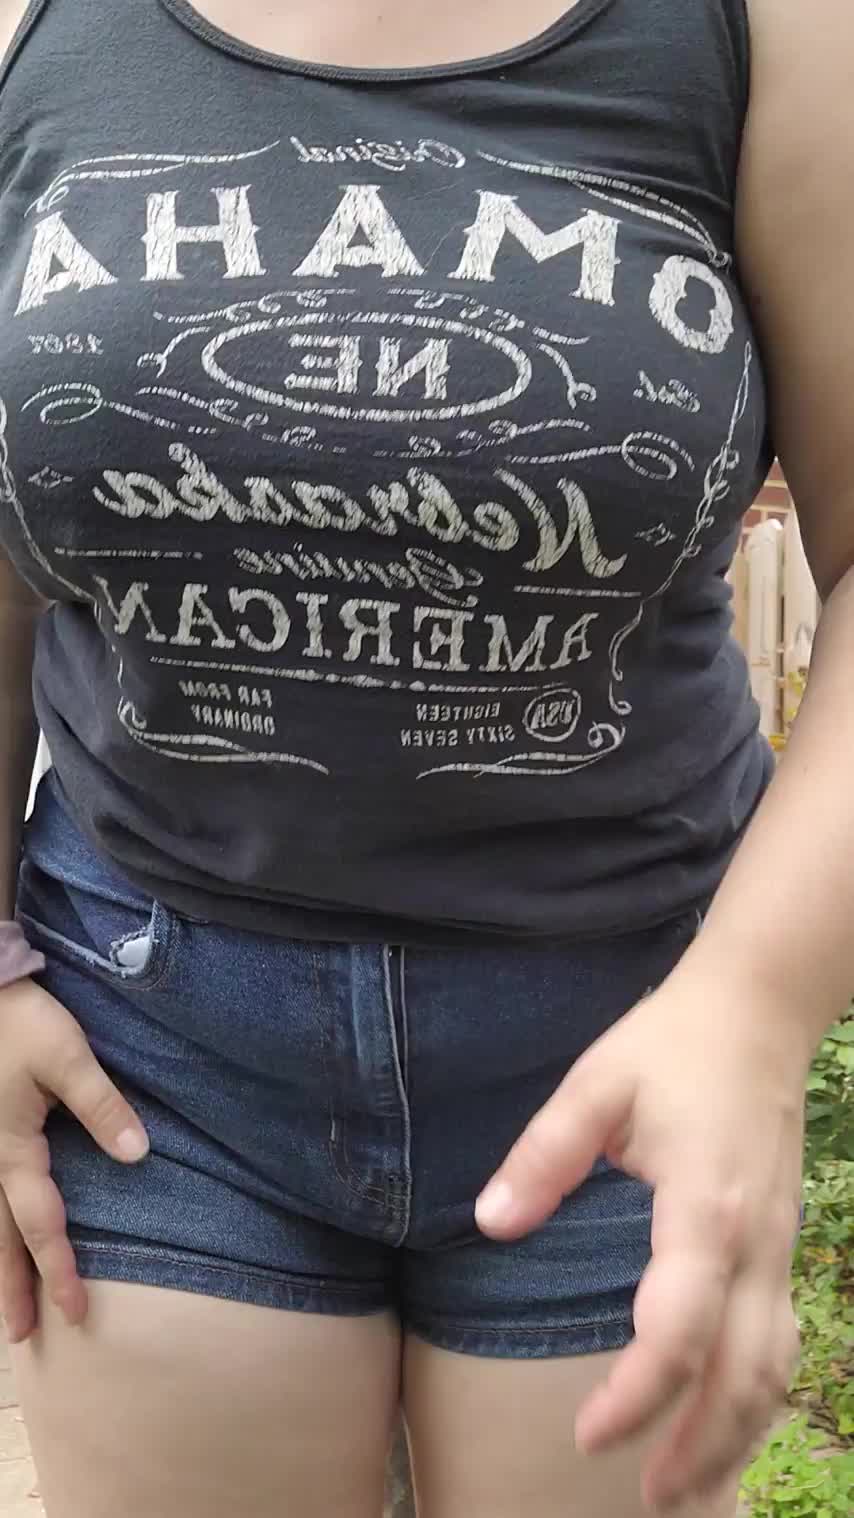 My boobs always end up stretching my shirts🙈 : video clip